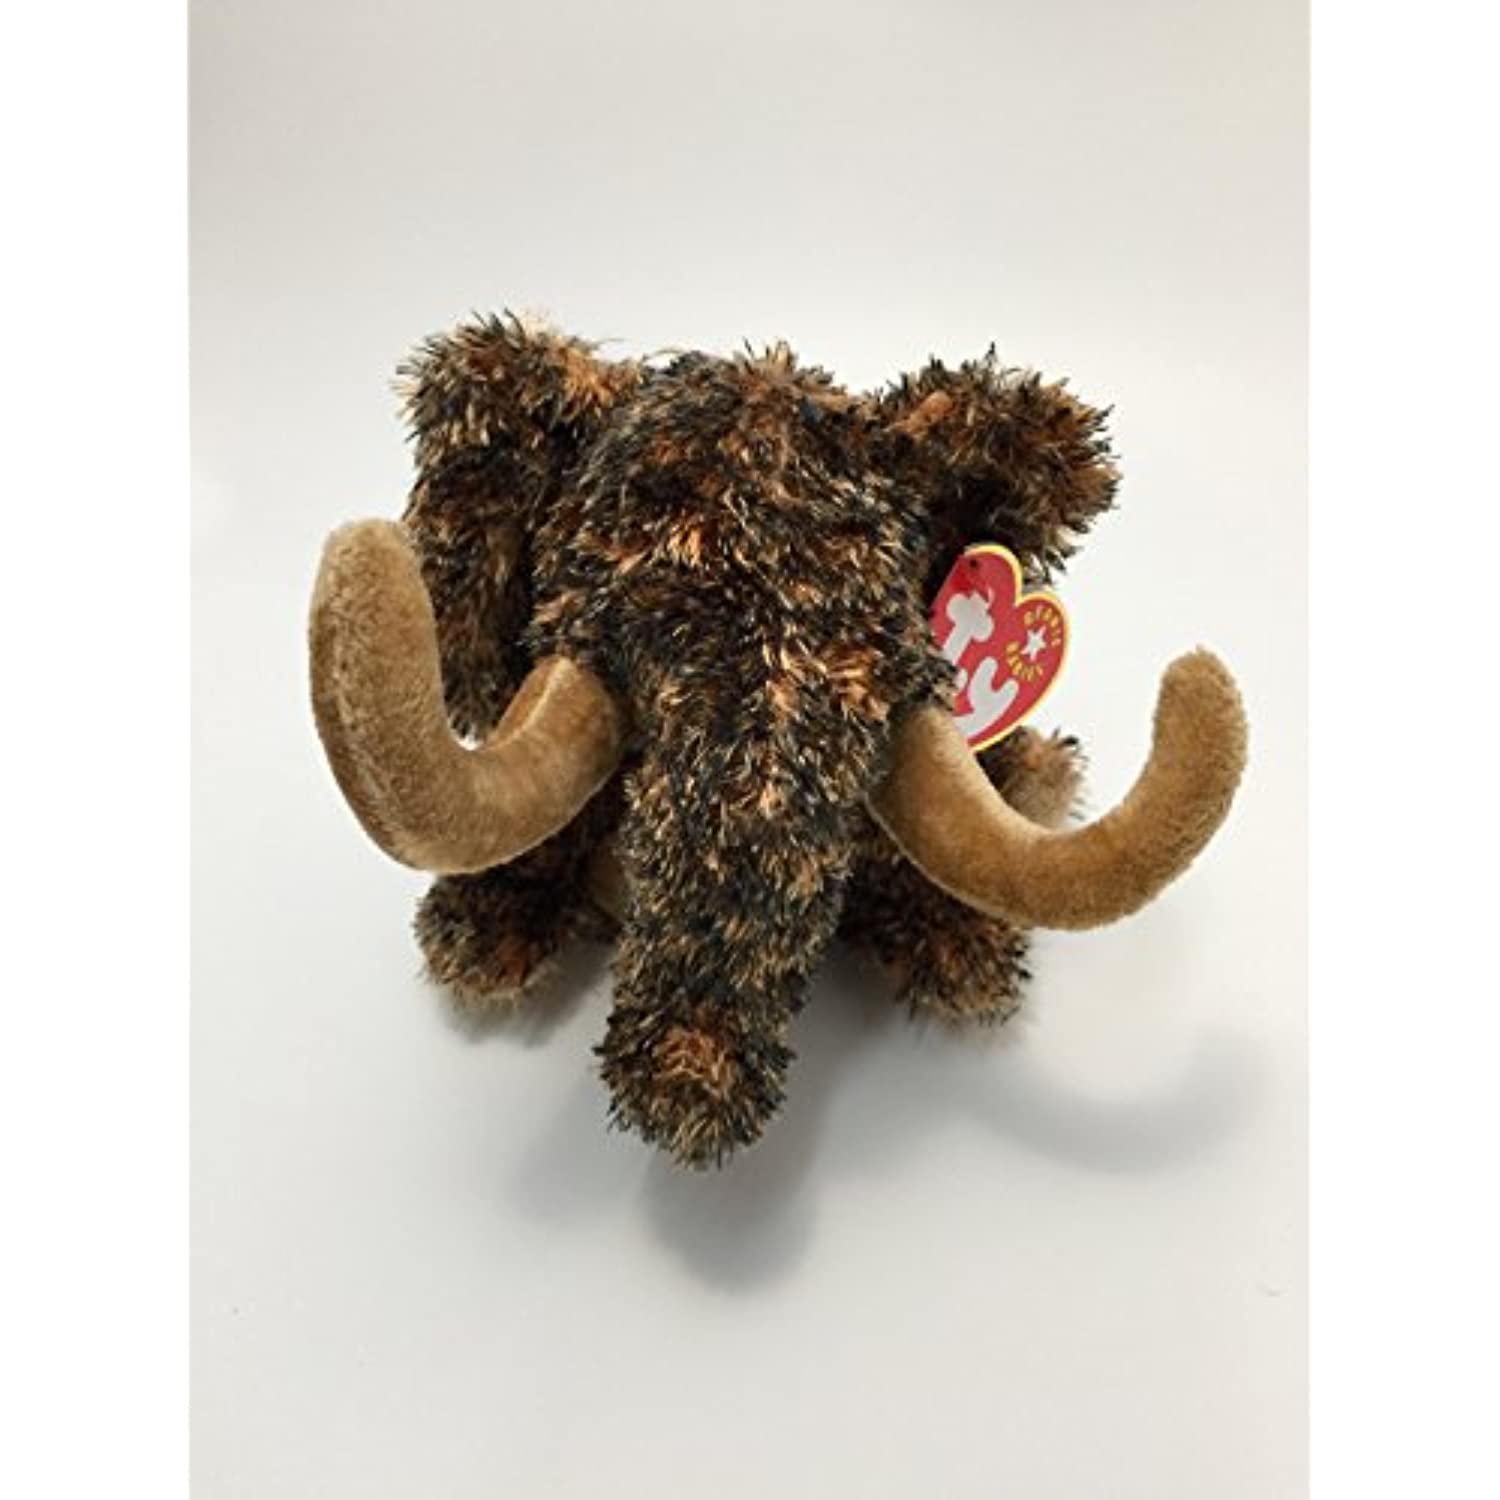 Giganto Retired 2001 Ty Beanie Baby 7 in Brown Plush Mammoth 3up MWMT for sale online 